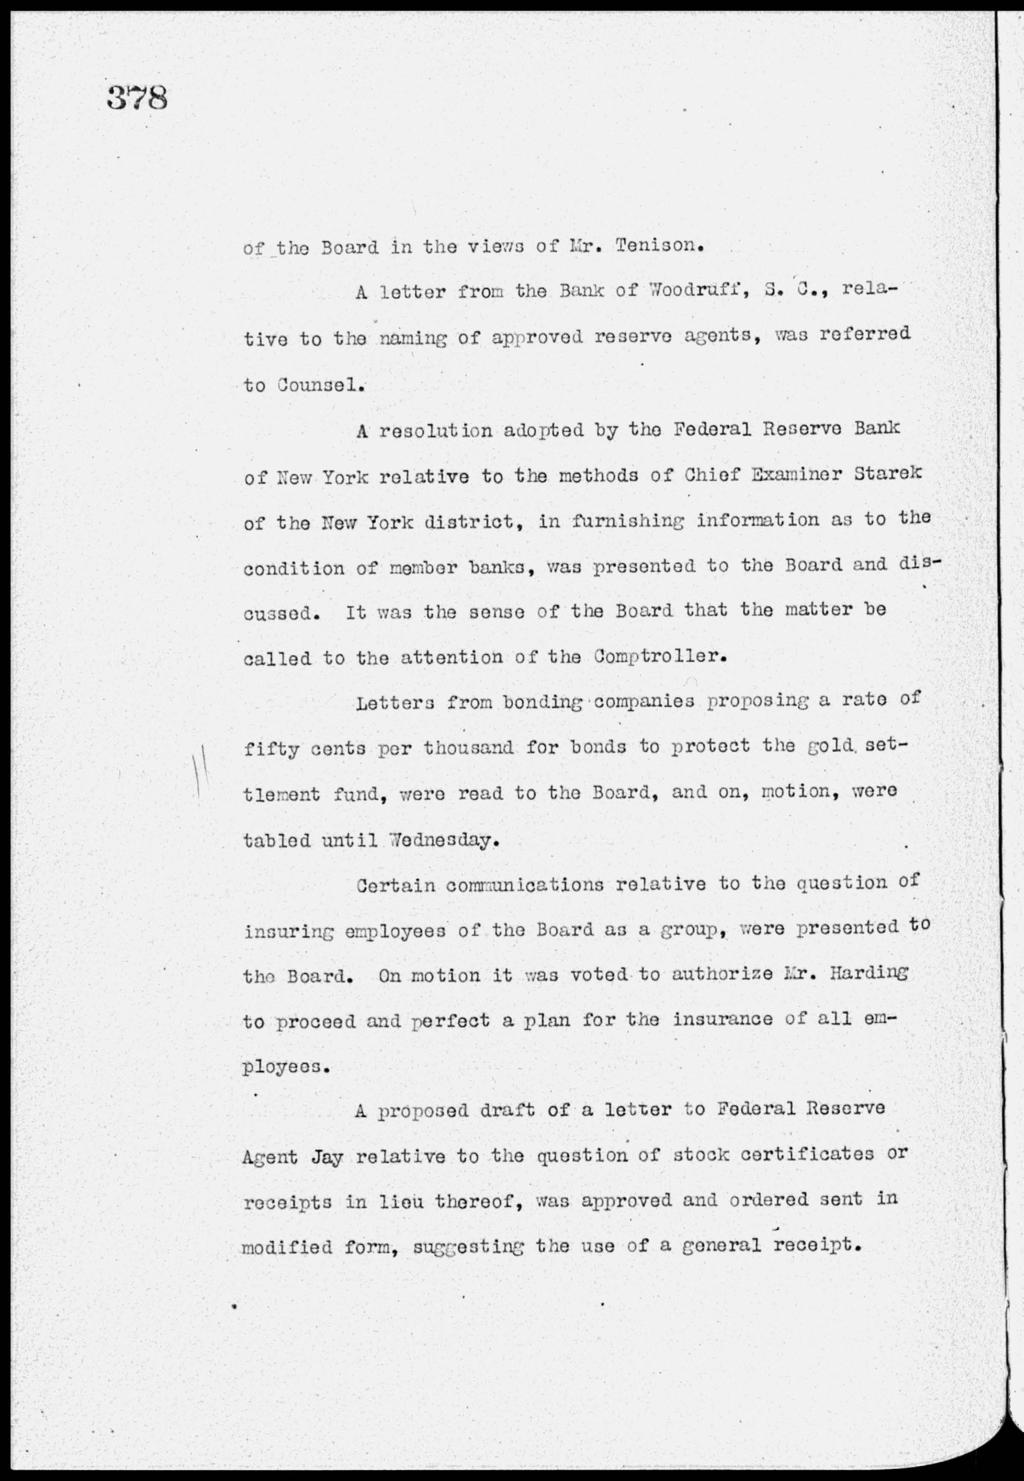 378 of the Board in the views of Mr. Tenison. A letter from the Bank of Woodruff, S.0., relative to the naming of approved reserve agents, was referred to Counsel.